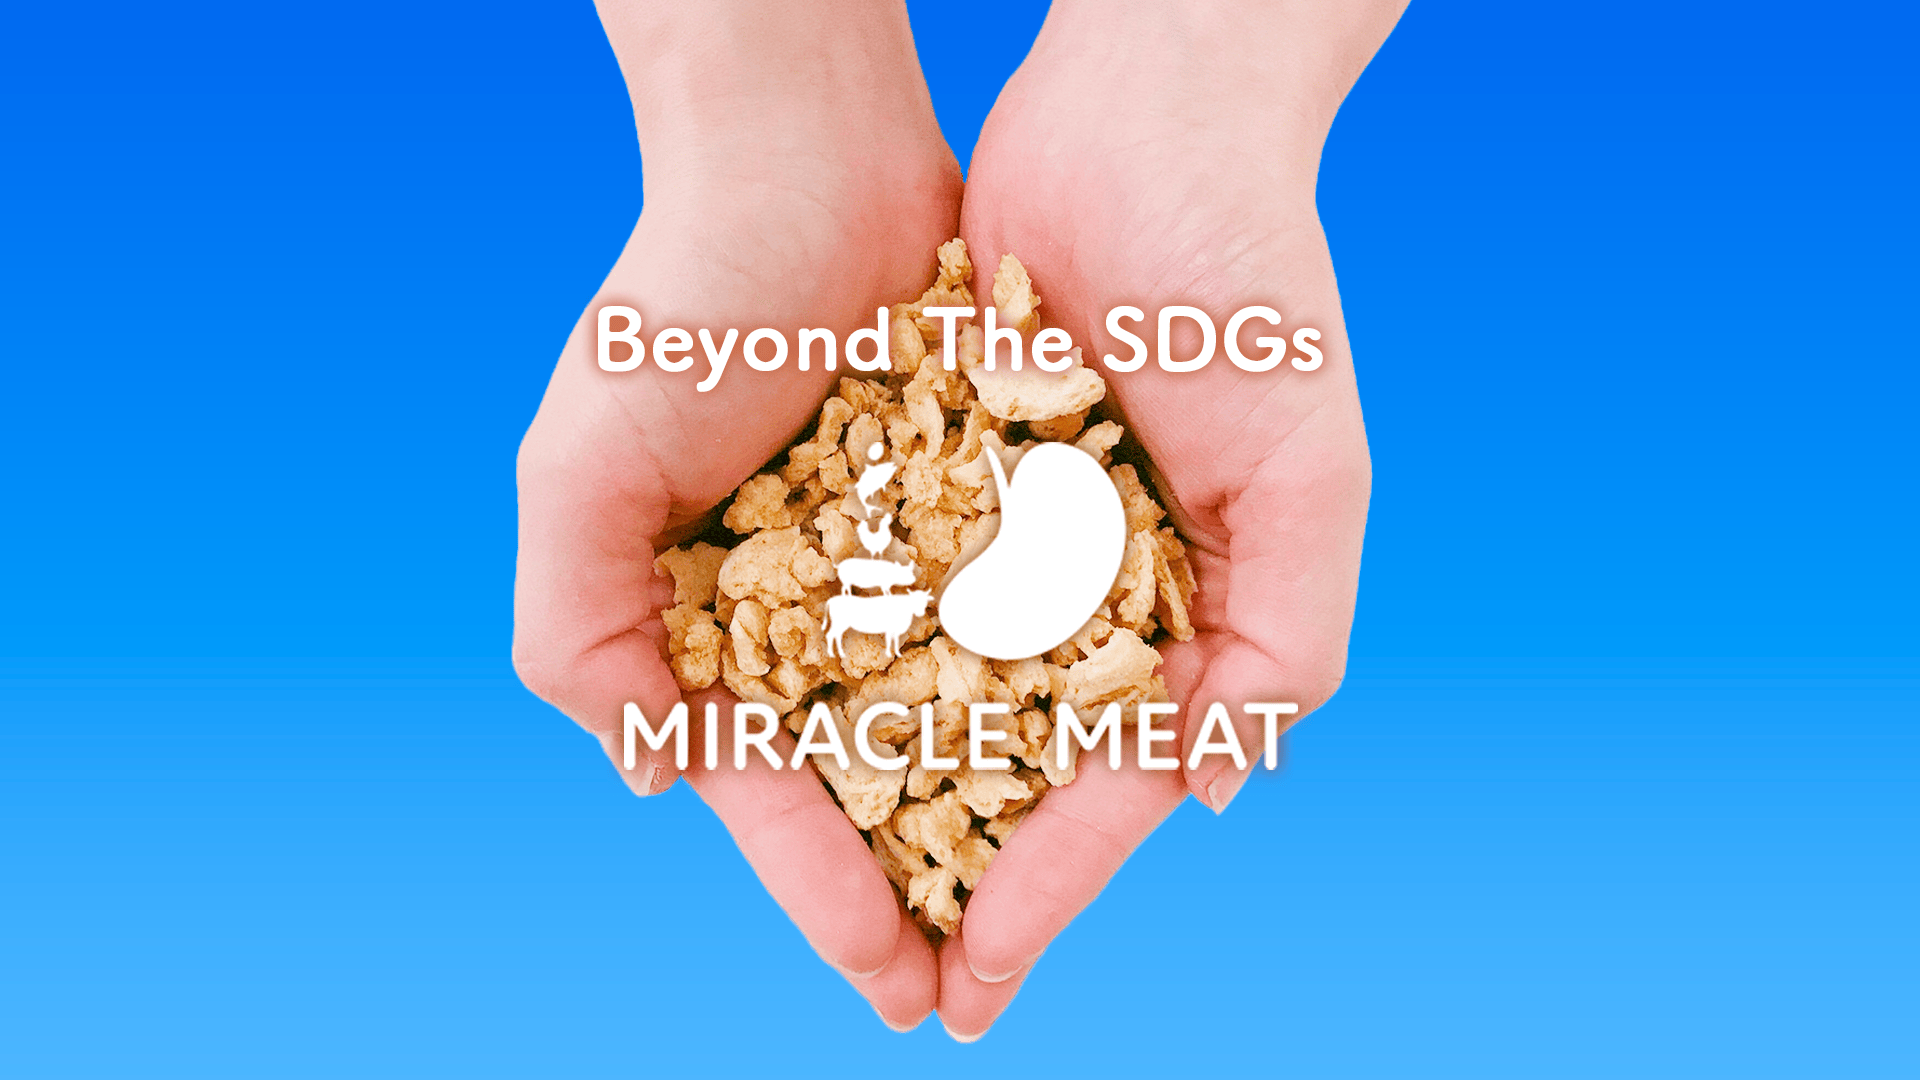 Beyond The SDGs MIRACLE MEAT